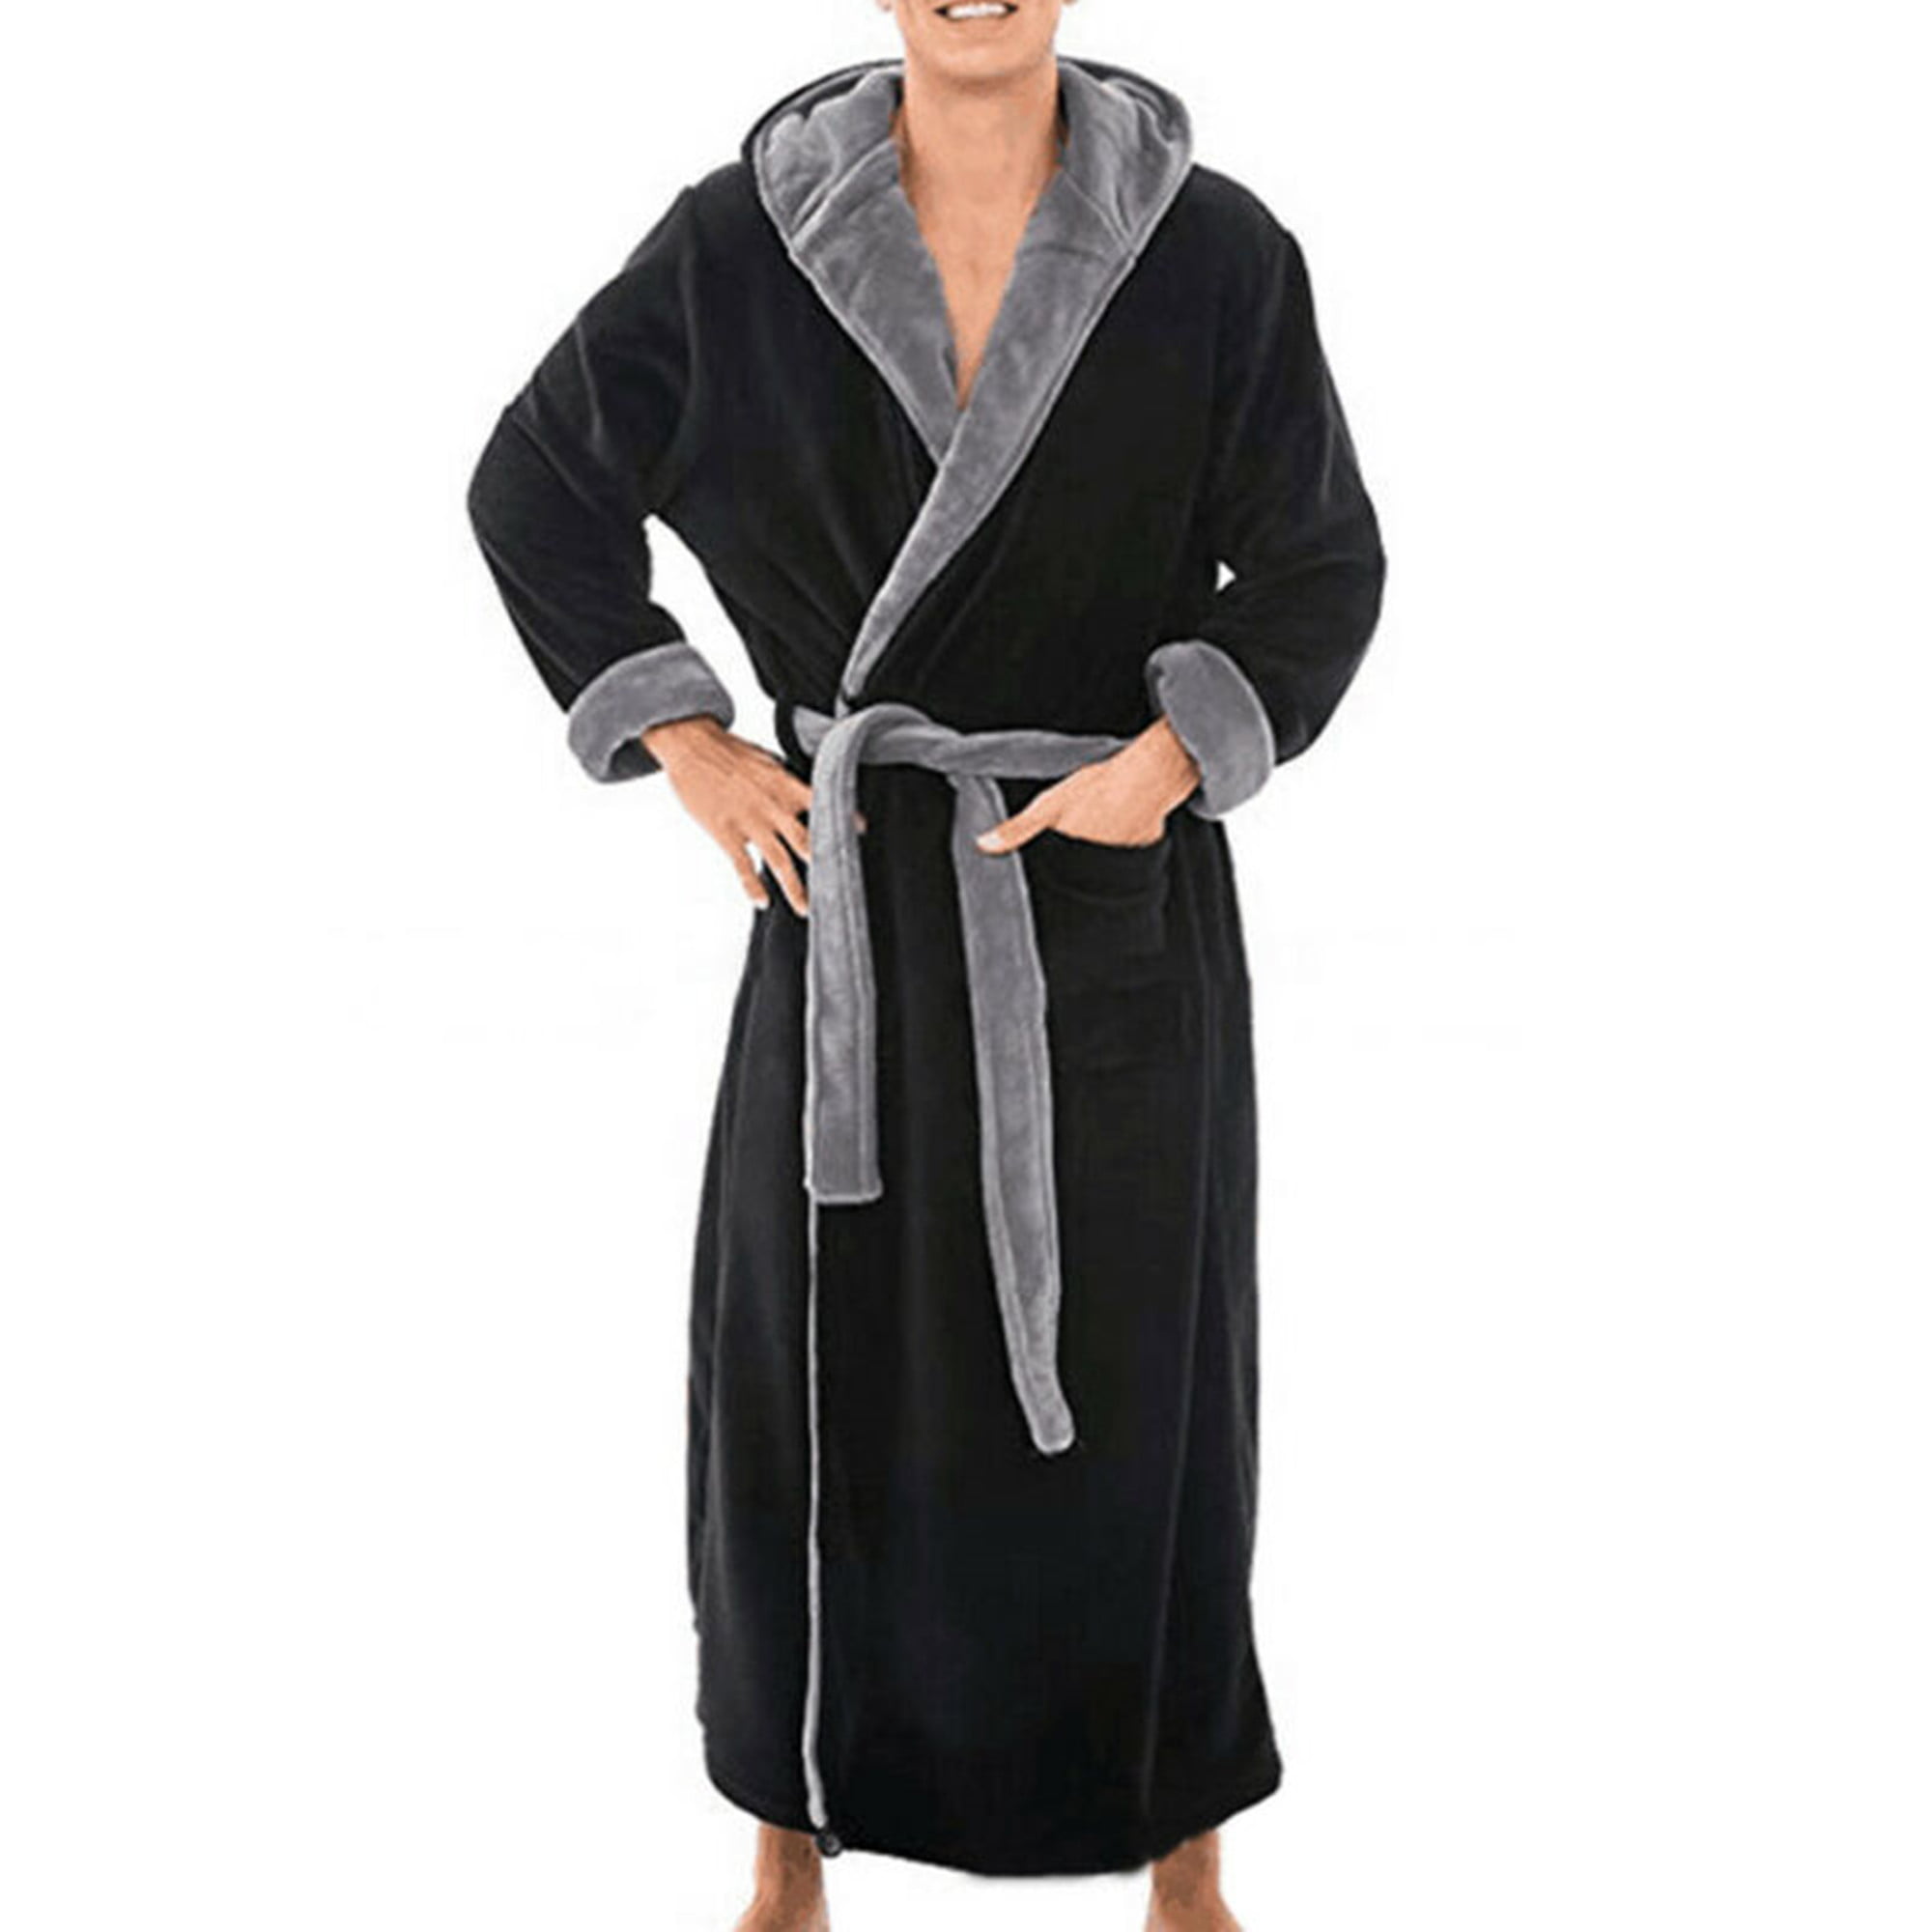 Details about   PERSONALISED Mens Gents Luxury Flannel Fleece HOODED Dressing Gown Robe GIFT